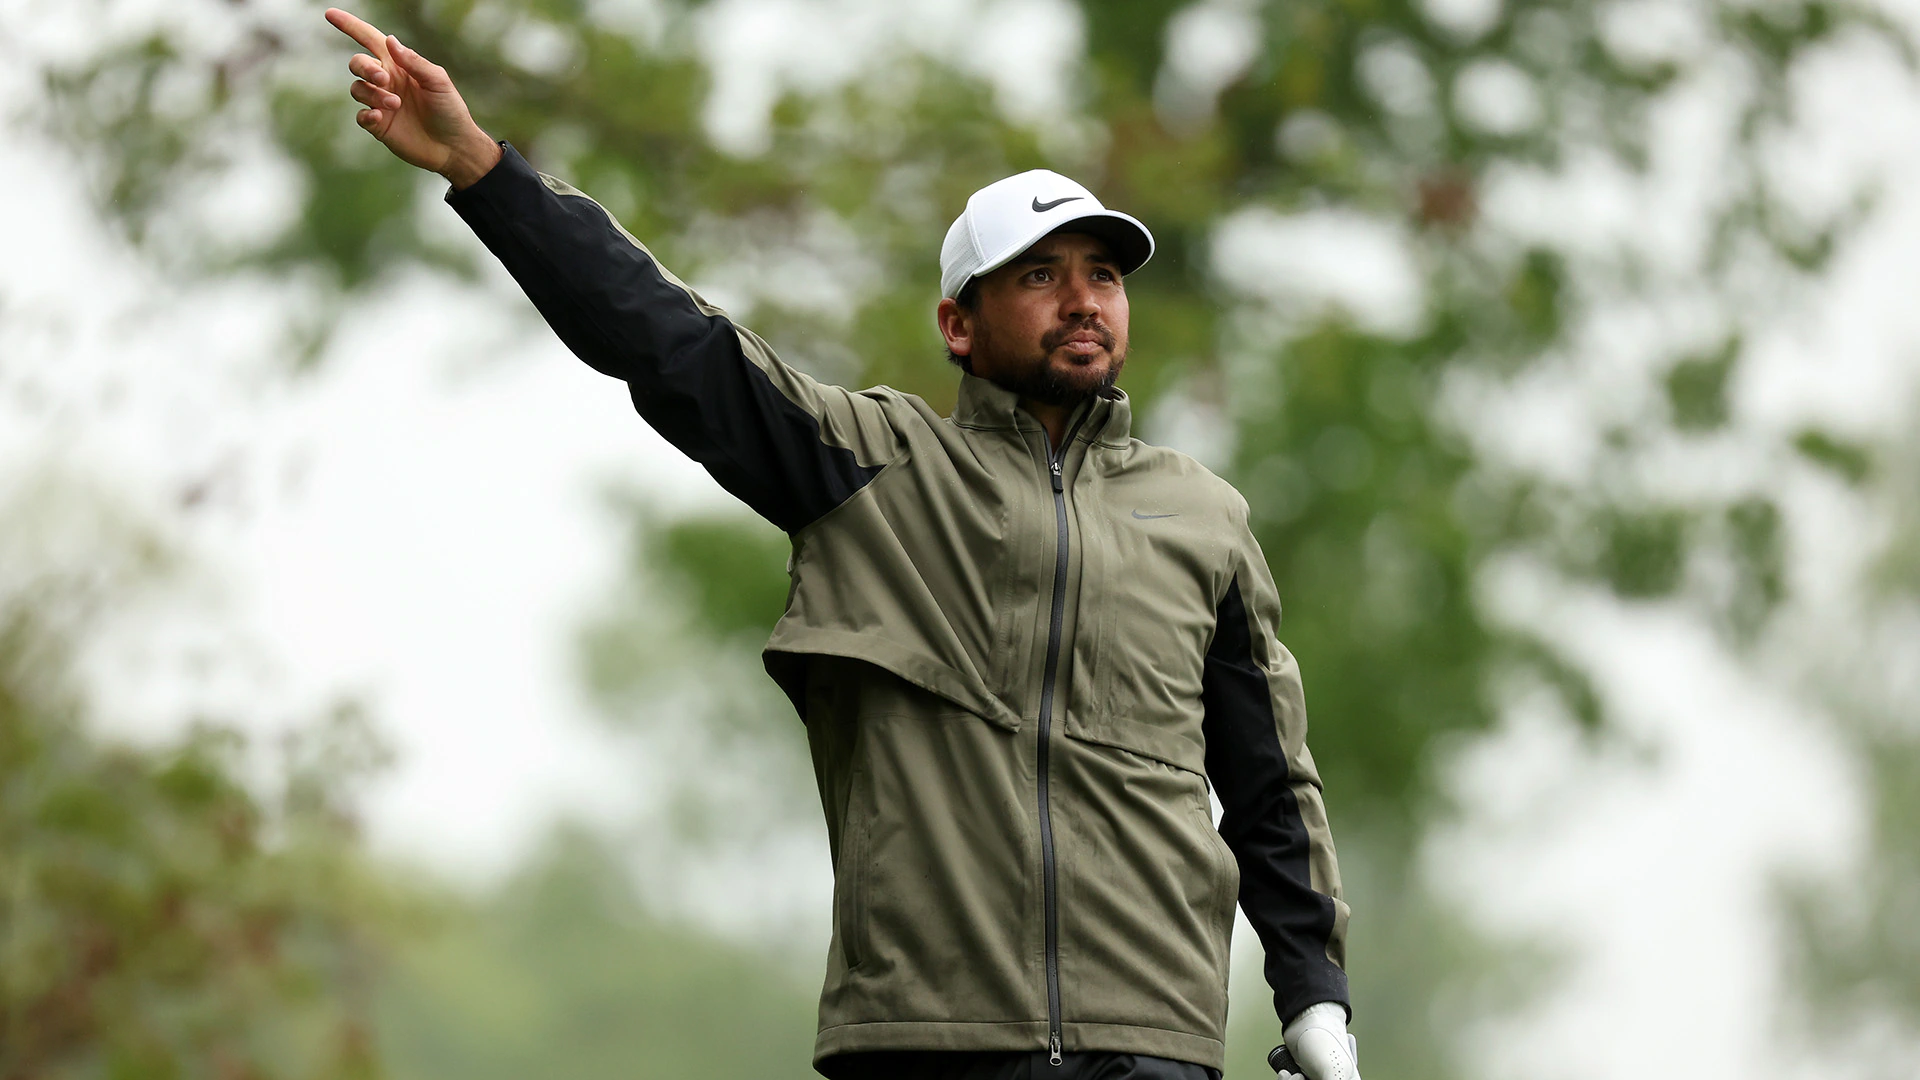 From three ahead to seven back, Jason Day (79) sinks at rainy Wells Fargo